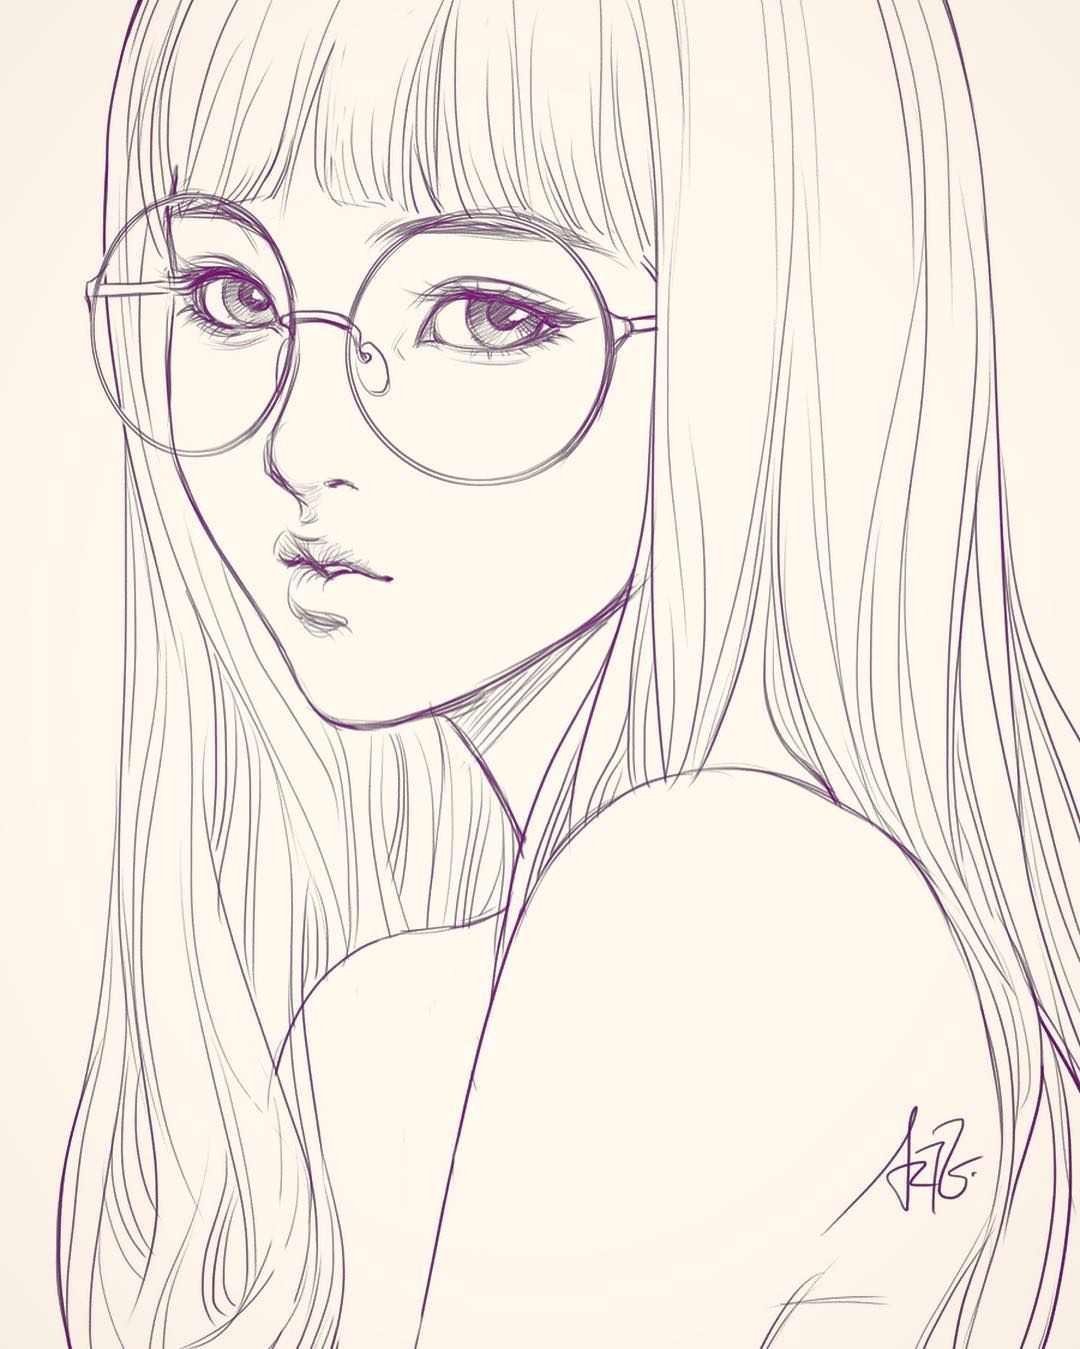 Drawing Anime Female Lips Last Sketch Of Girl with Glasses Having Bad Backache It Hurts